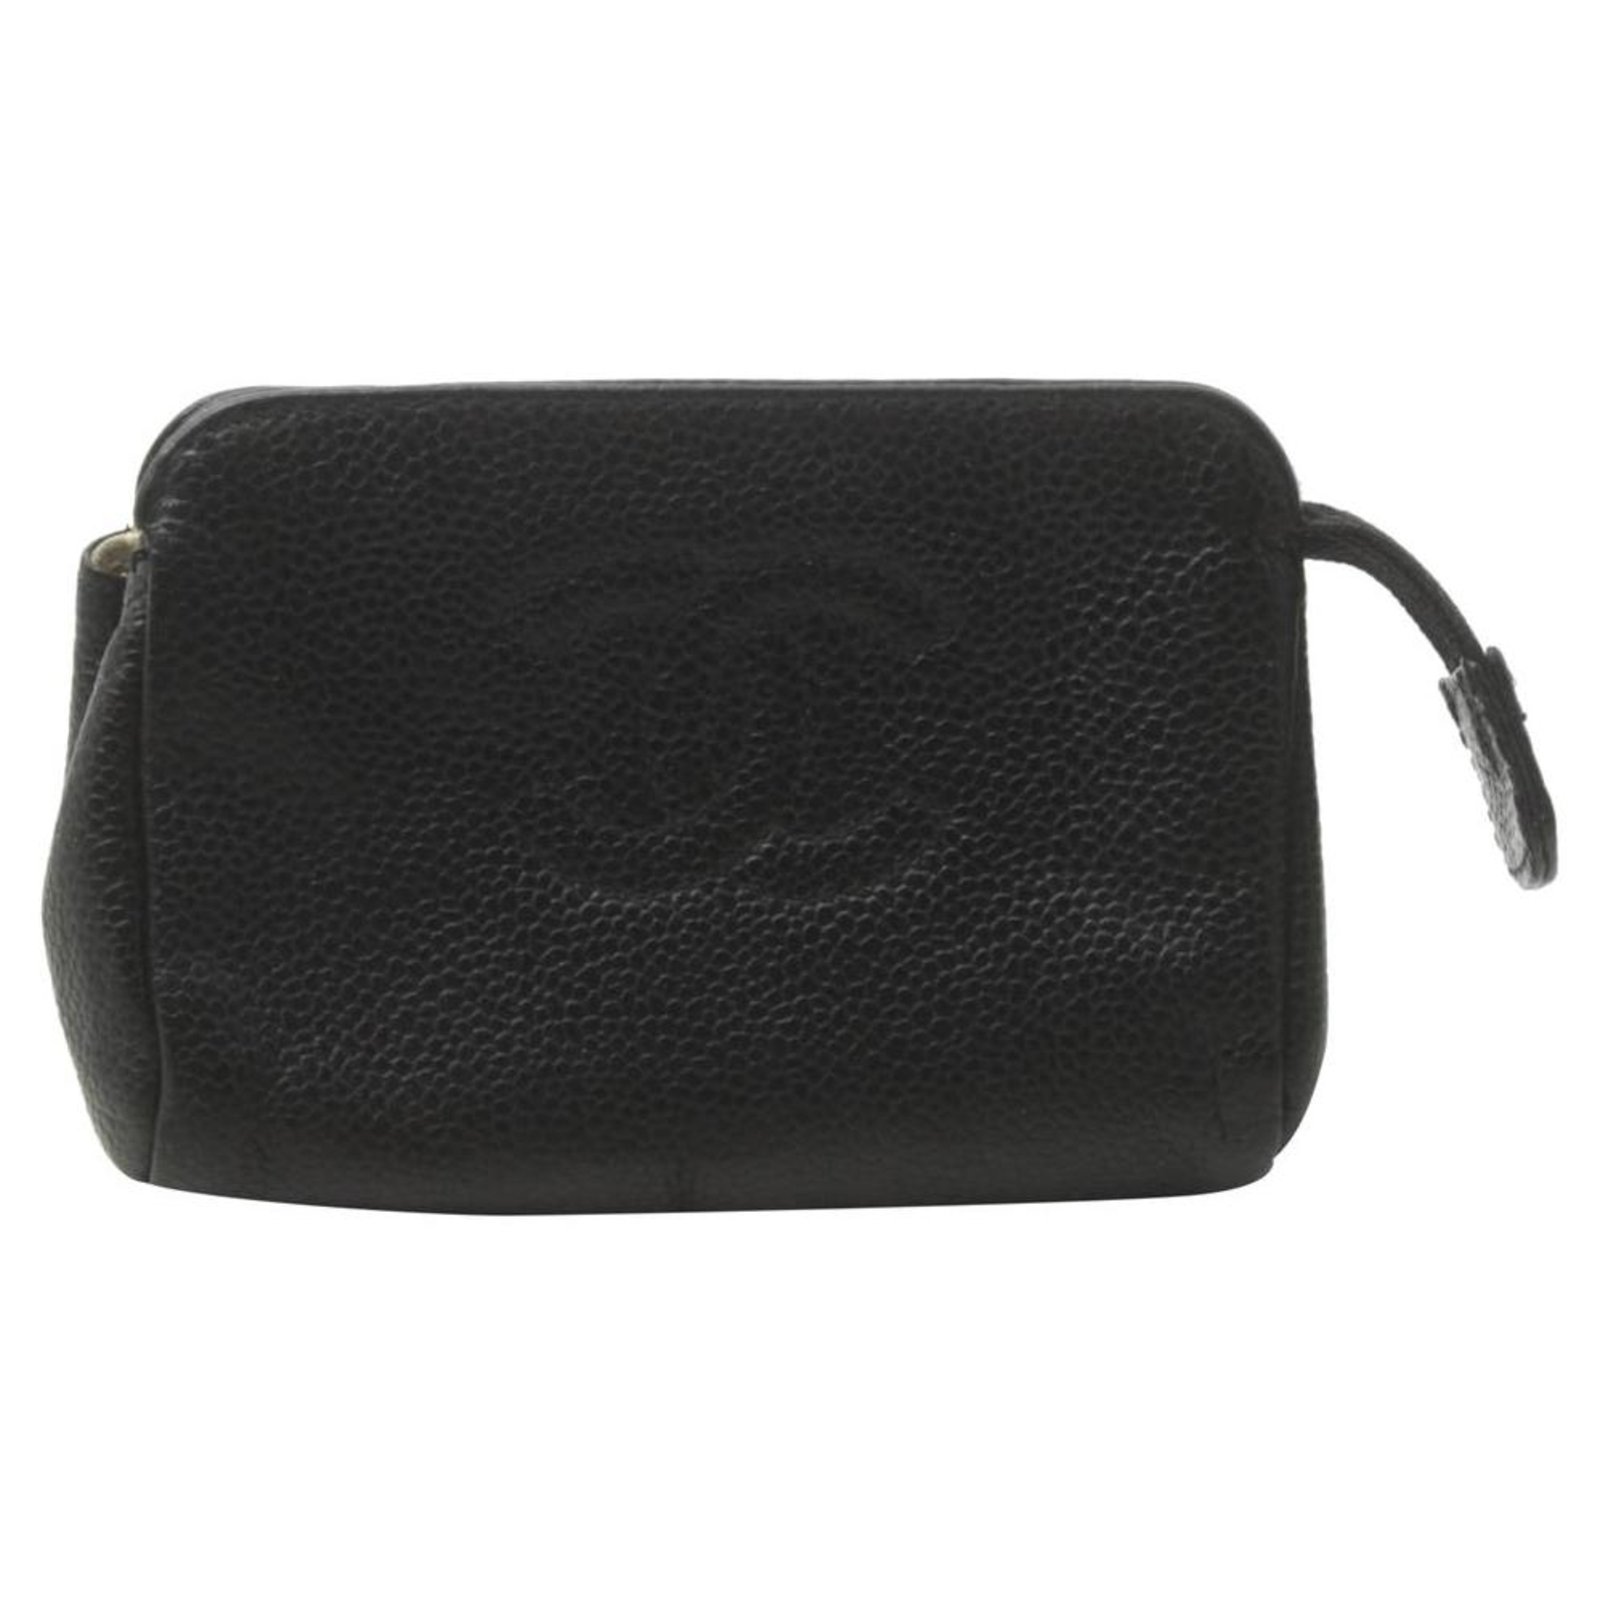 Chanel Chanel Black Caviar Leather Cosmetic Case Pouch